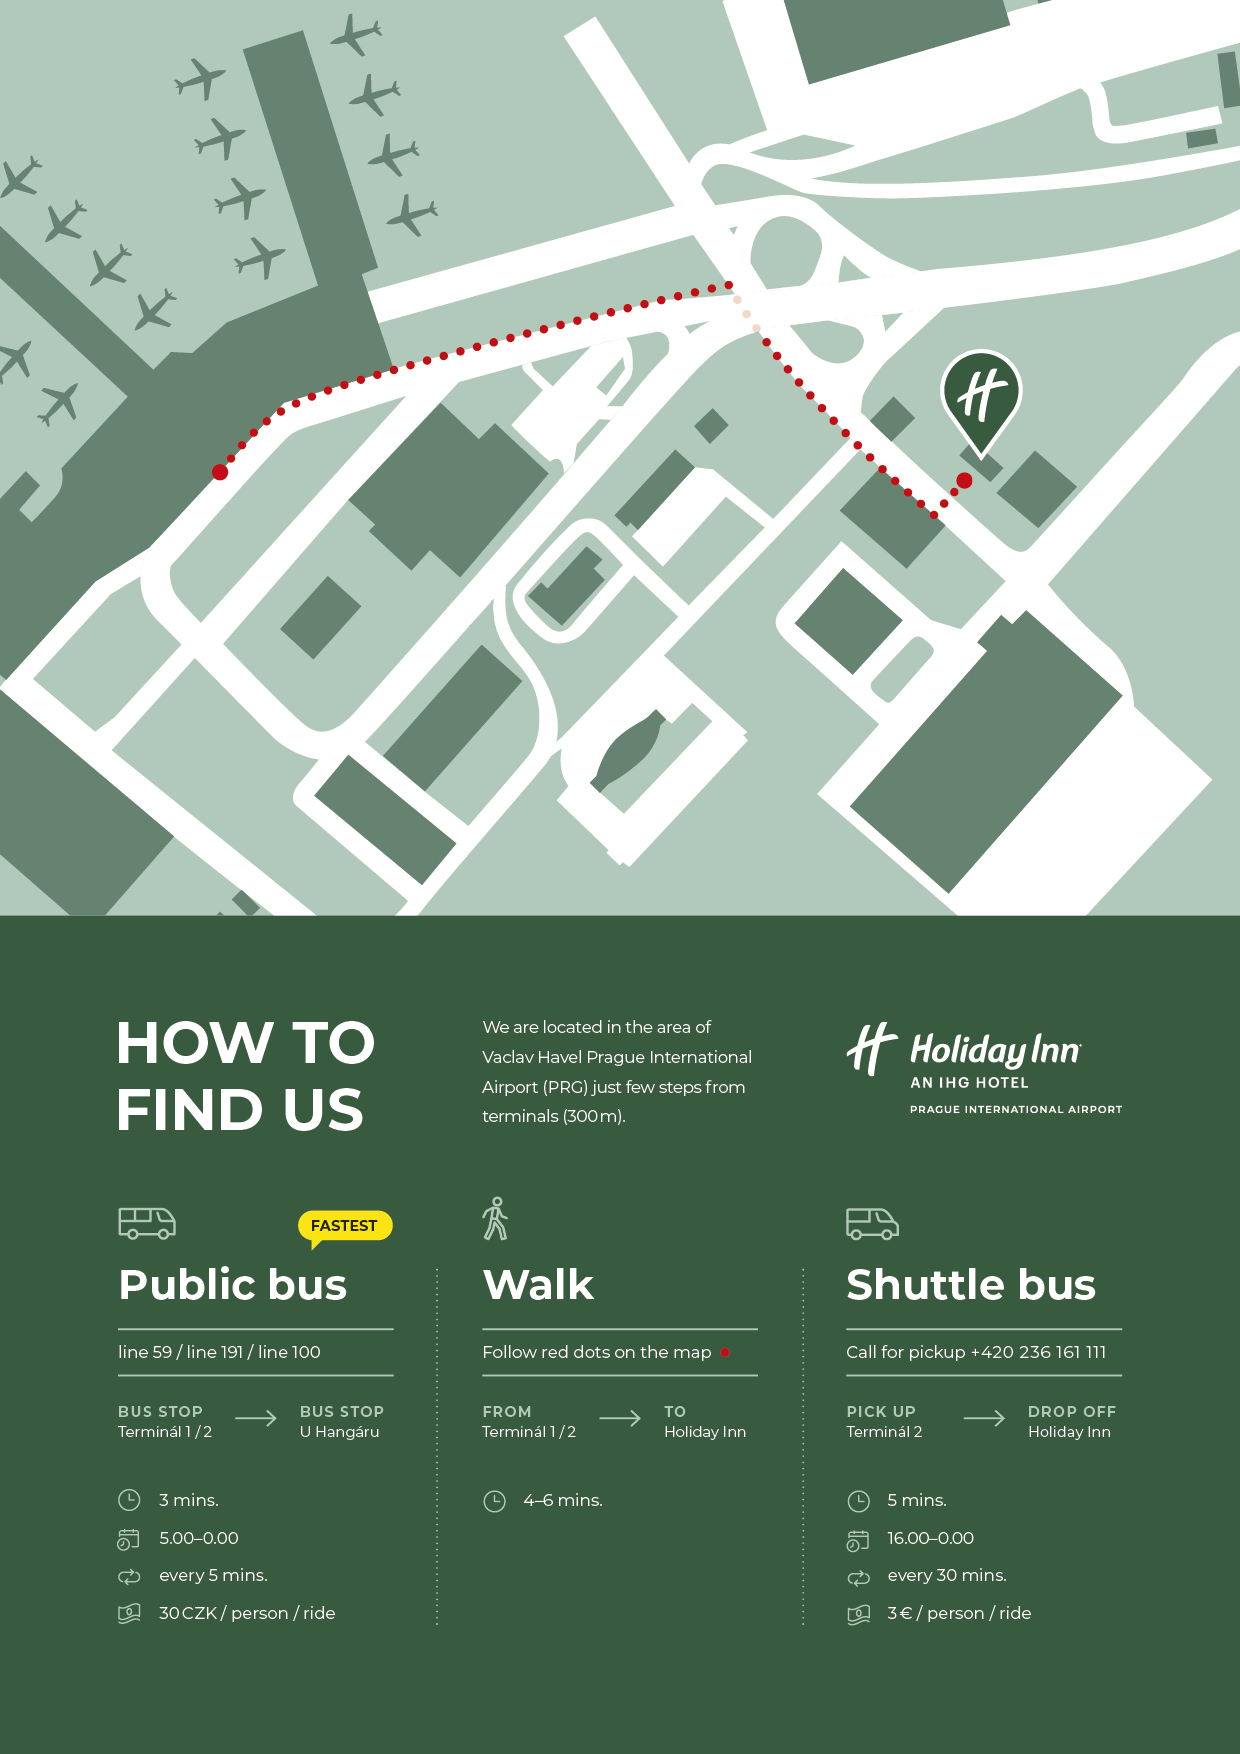 How to get to the hotel